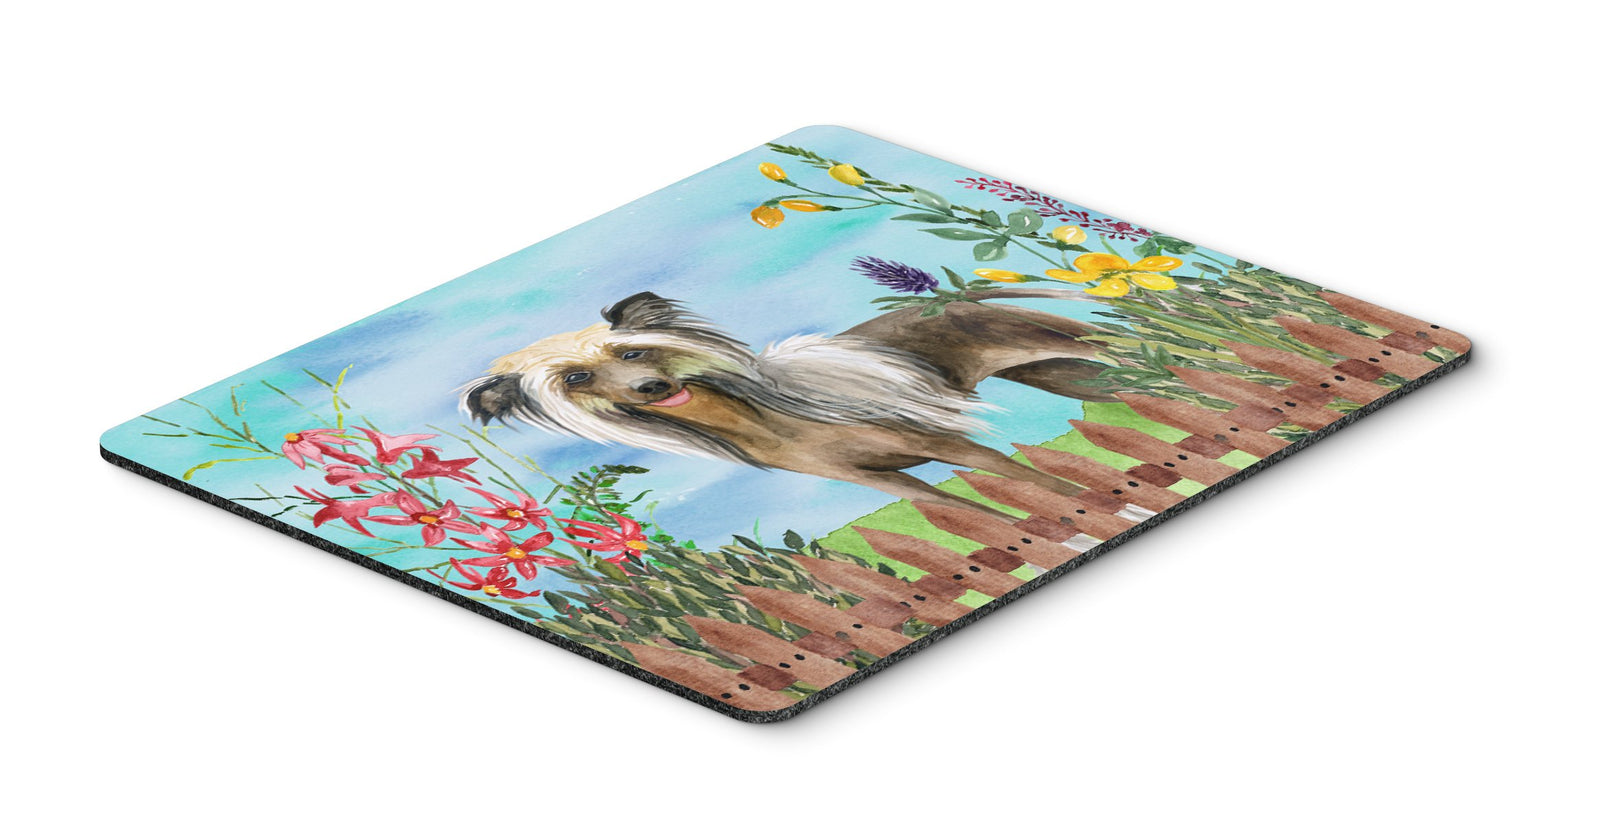 Chinese Crested Spring Mouse Pad, Hot Pad or Trivet CK1221MP by Caroline's Treasures